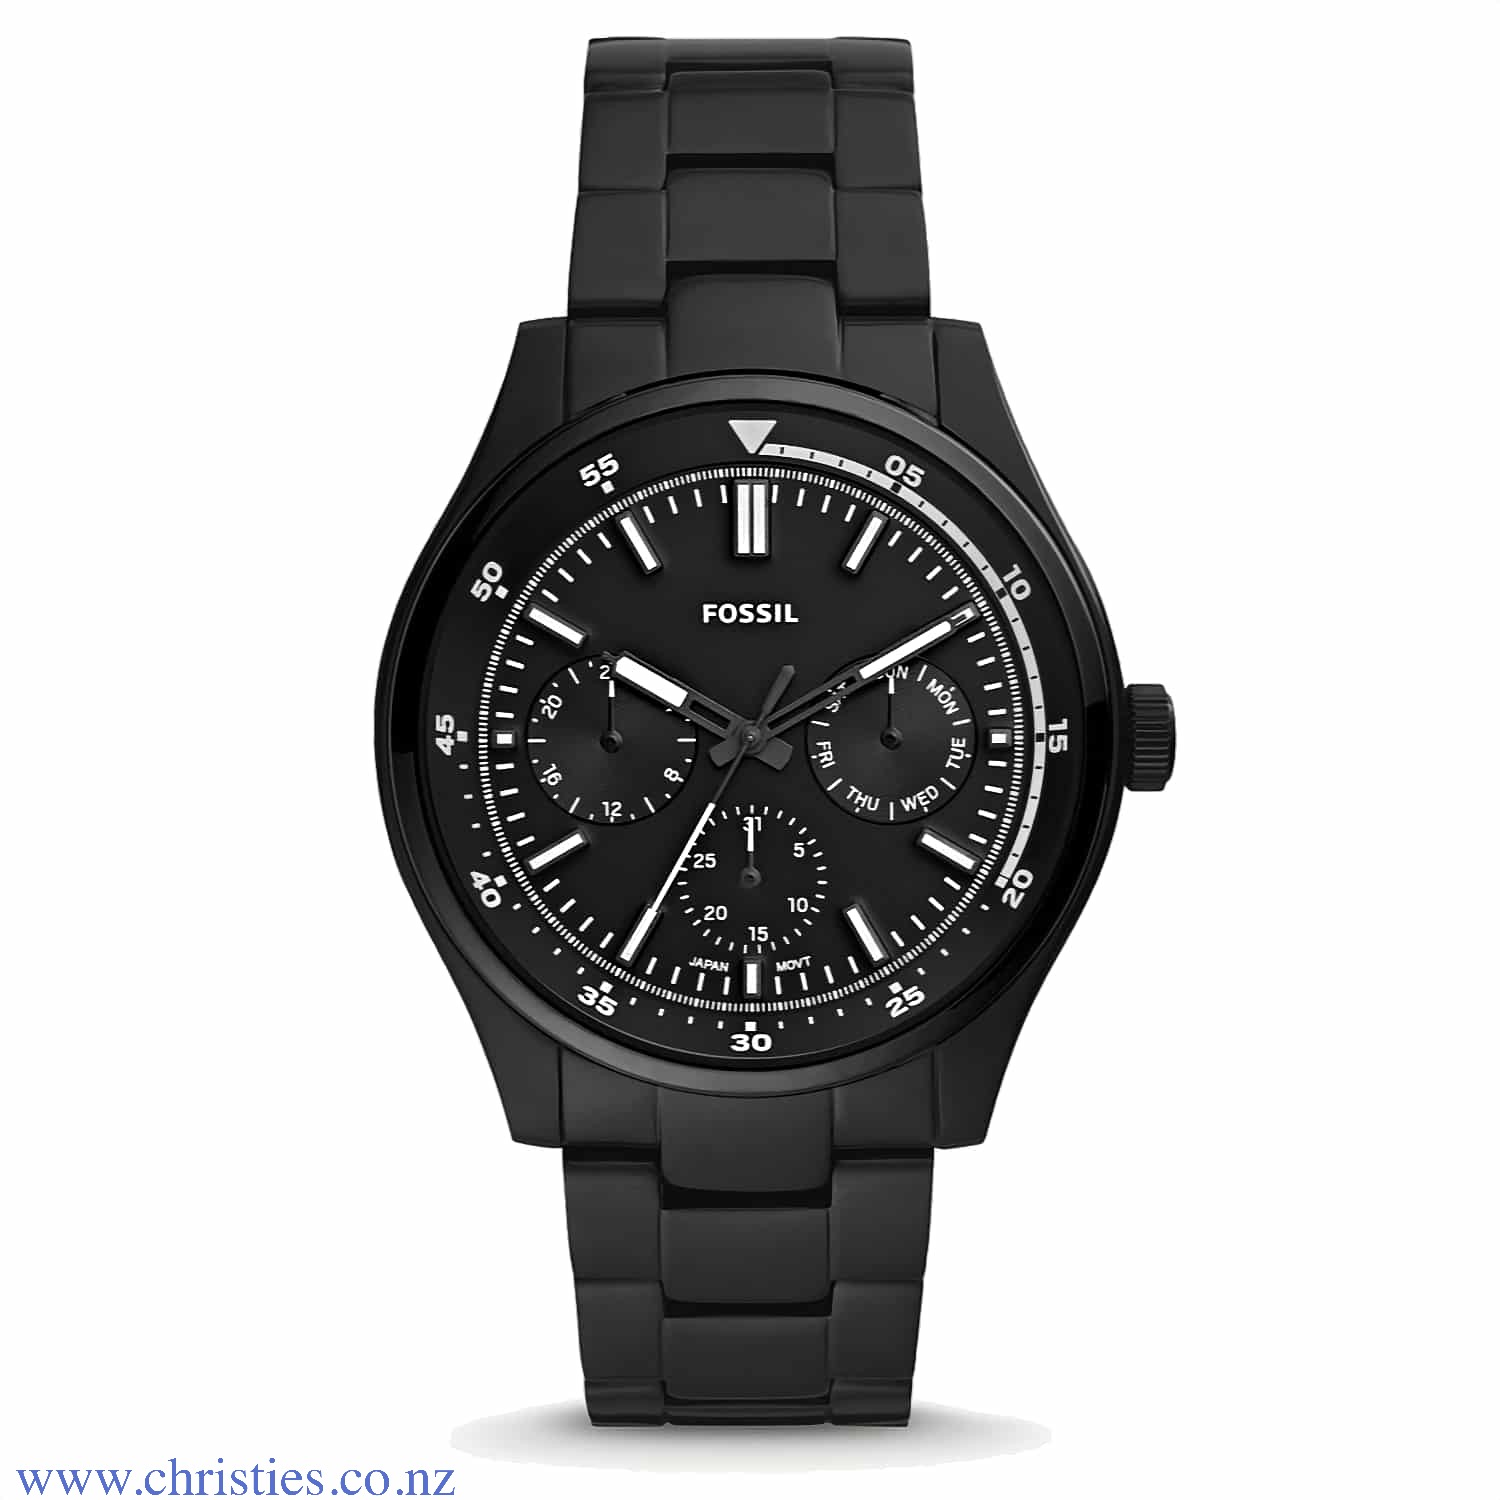 FS5576 Fossil Belmar Multifunction Black Watch. FS5576 Fossil Belmar Multifunction Black Stainless Steel Watch Afterpay - Split your purchase into 4 instalments - Pay for your purchase over 4 instalments, due every two weeks. You’ll pay your first install